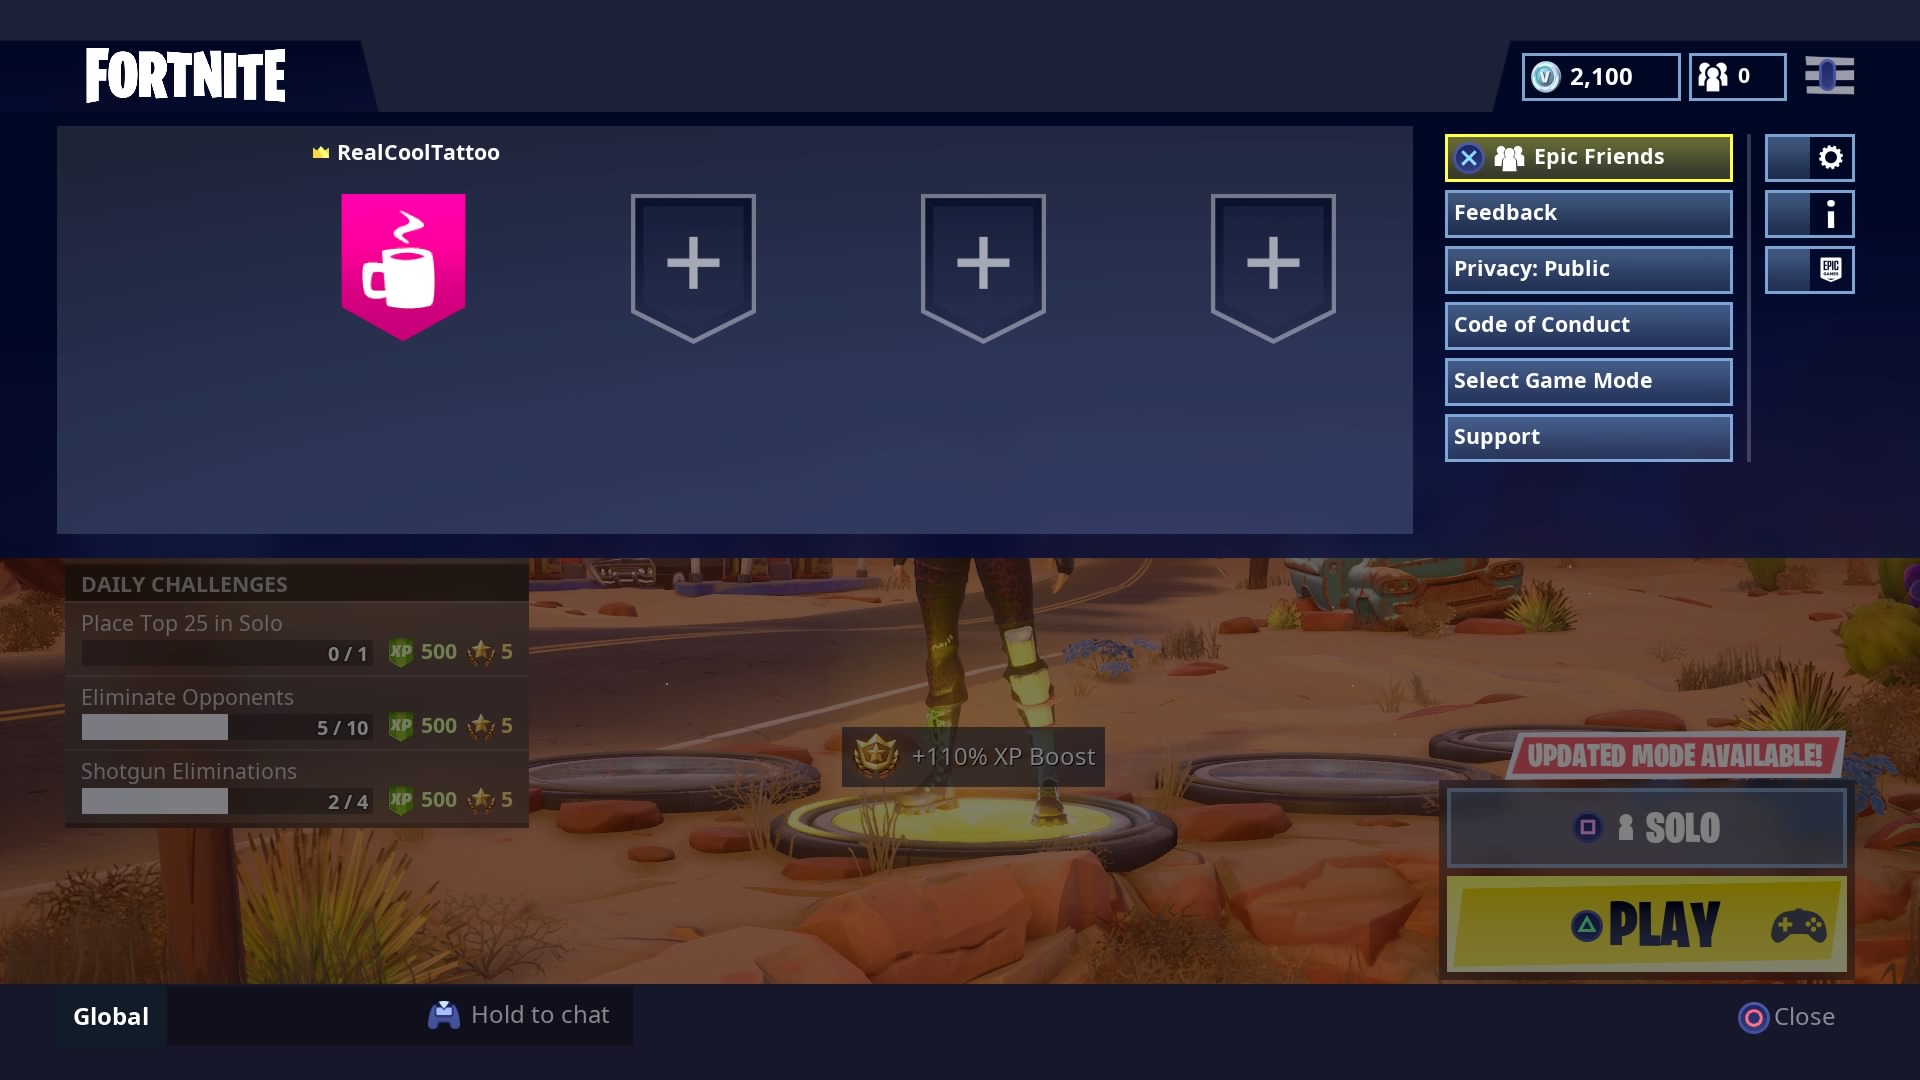 can you play with people on mac and ps4 for fortnite